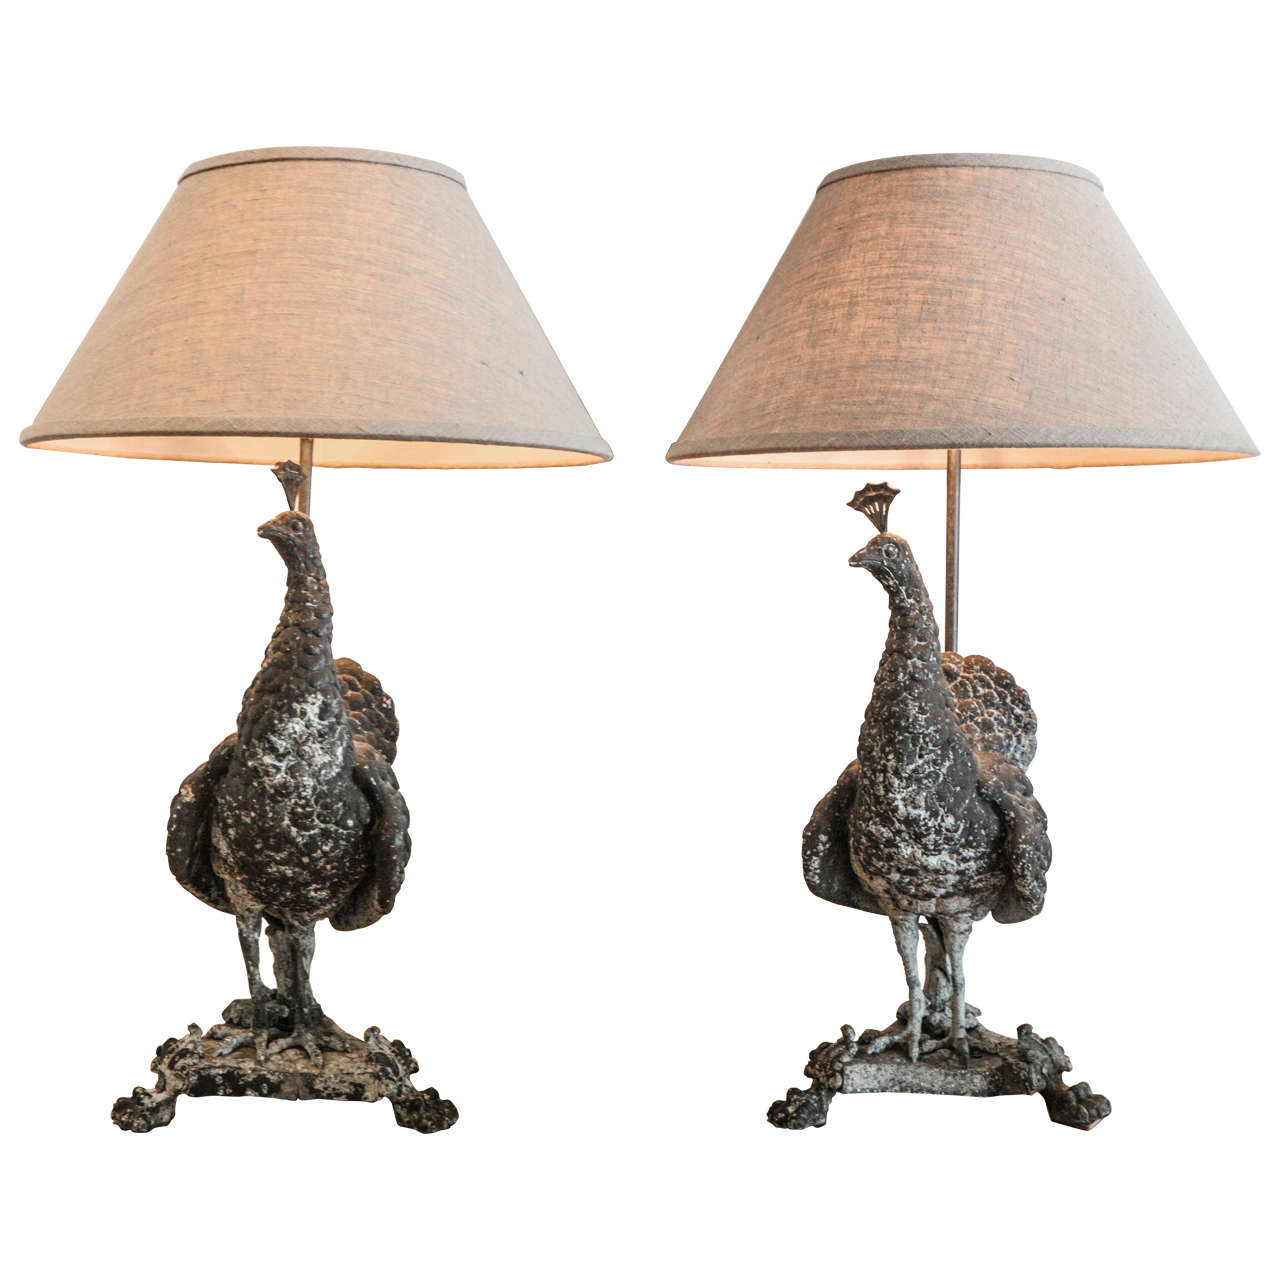 Pair of Metal Peacock Lamps, France, Late 19th Century